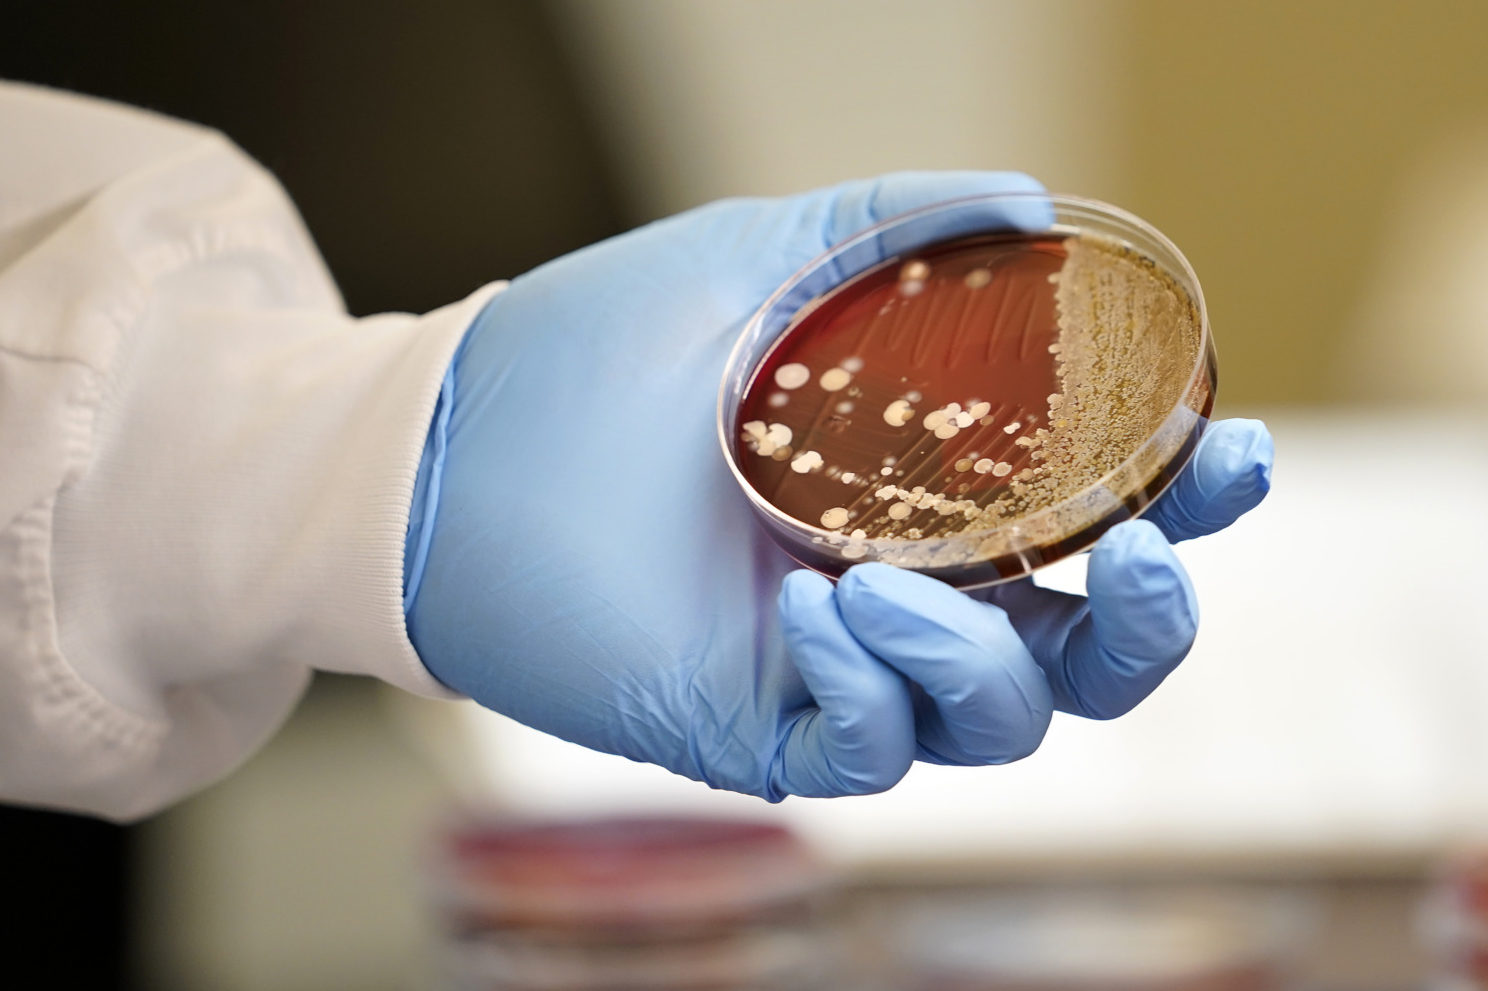 Image shows a blue-gloved hand holding a petri dish with red growth medium. The red growth medium is speckled with yellowy-white spots and smears where bacteria has grown. This is a stock photo-style image to accompany the story on economic sustainability of veterinary labs.